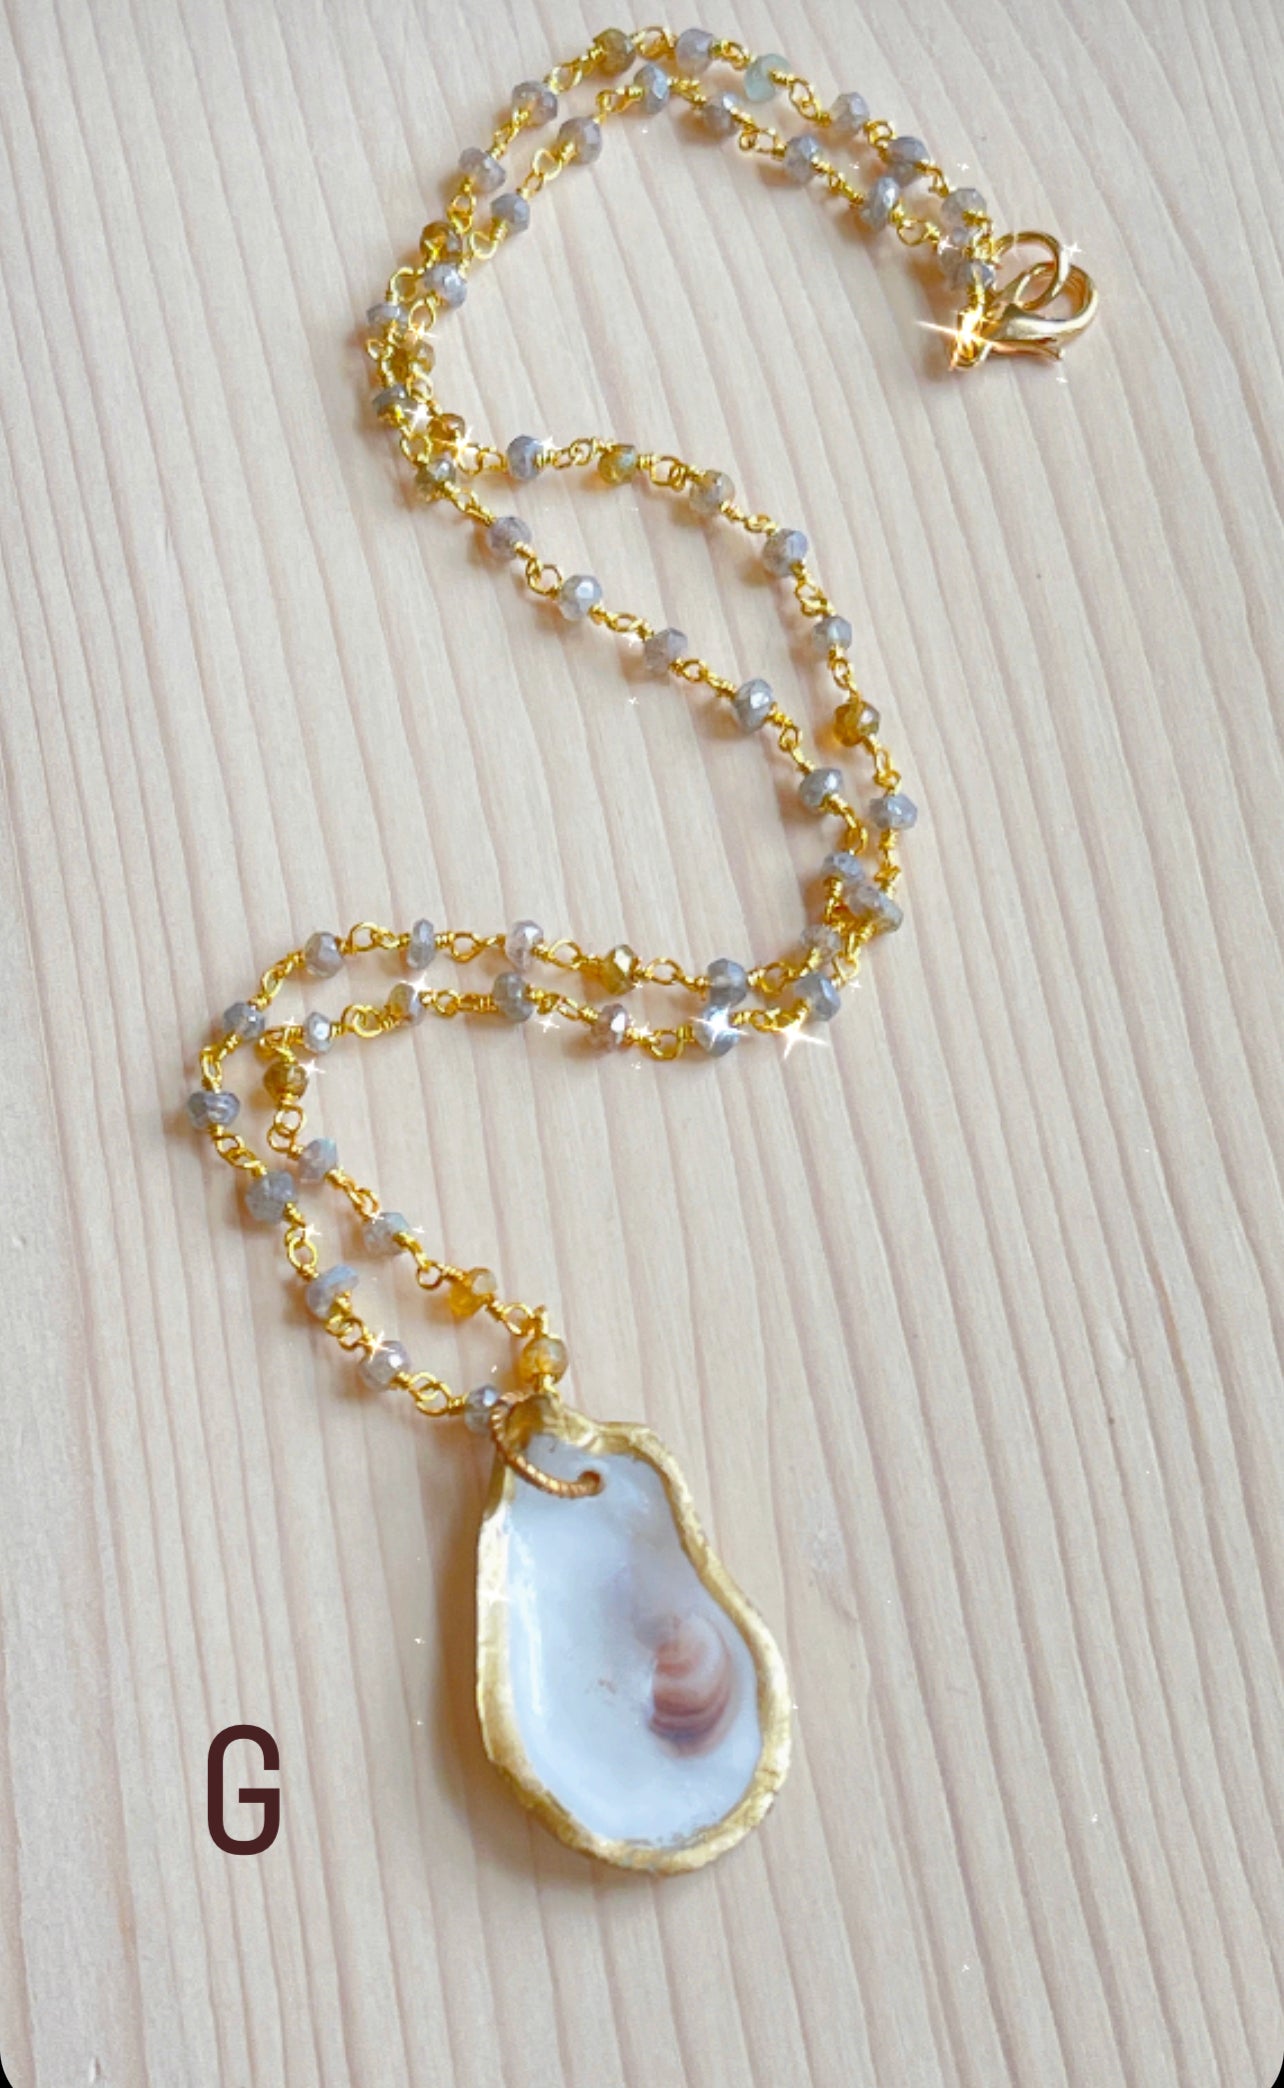 G.  Oyster shell with mystic labradorite and amber gemstone beaded chain. 